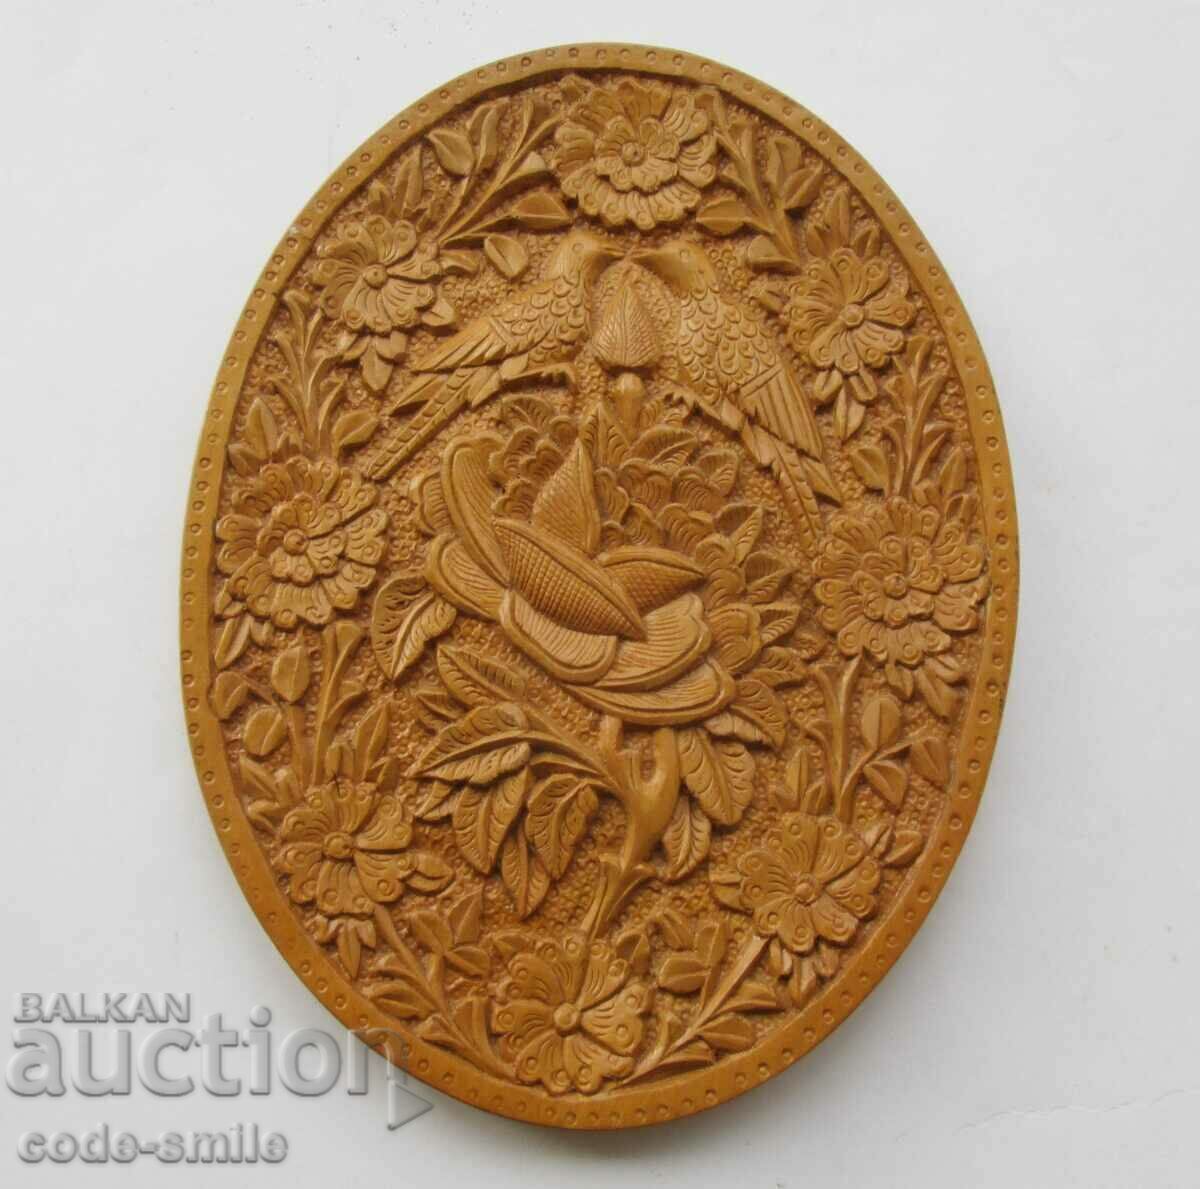 Old fine wood carving decoration ethnography wall panel